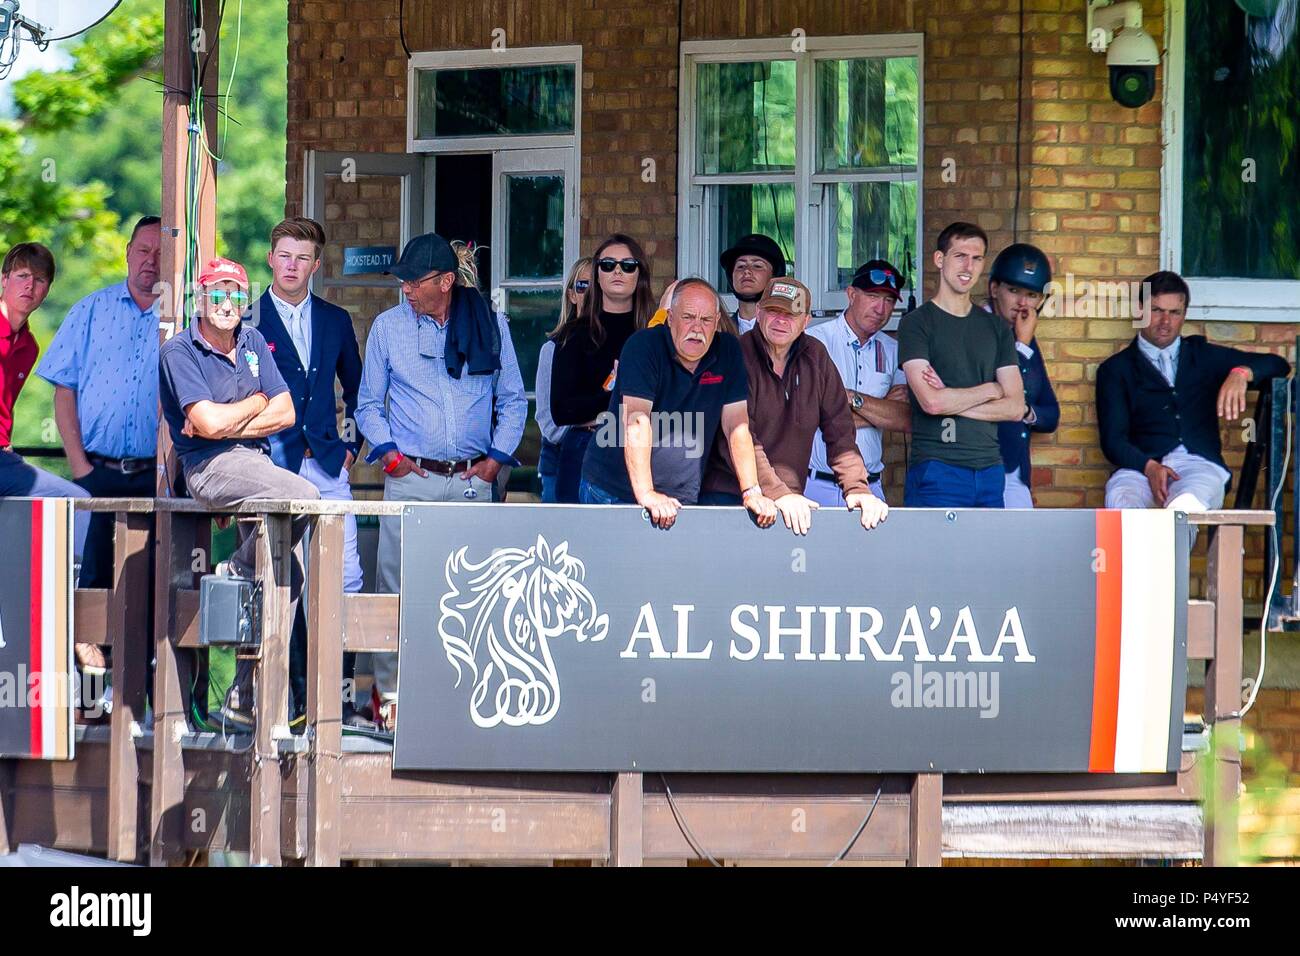 West Sussex, UK. 22nd June 2018. Spectators.The Hickstead under  25 Masters. The Al Shira'aa Hickstead Derby Meeting. Showjumping. The All England Jumping Course. Hickstead. West Sussex. UK. Day 4. 22/06/2018. Stock Photo